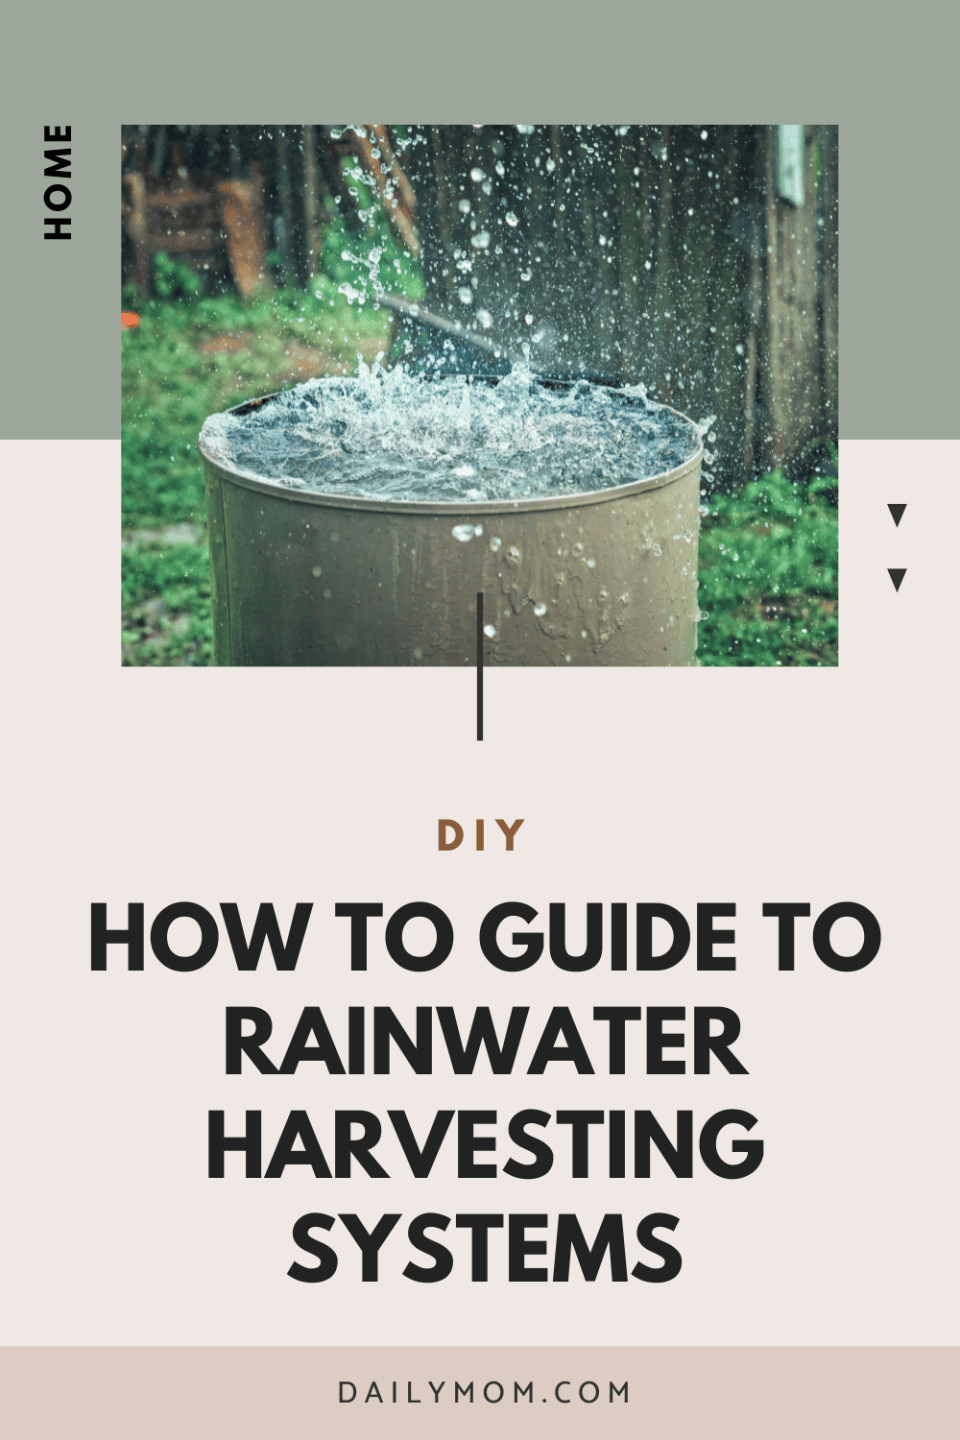 Guide To Rainwater Harvesting Systems At Home From Costs To Disadvantages  2 Daily Mom, Magazine For Families